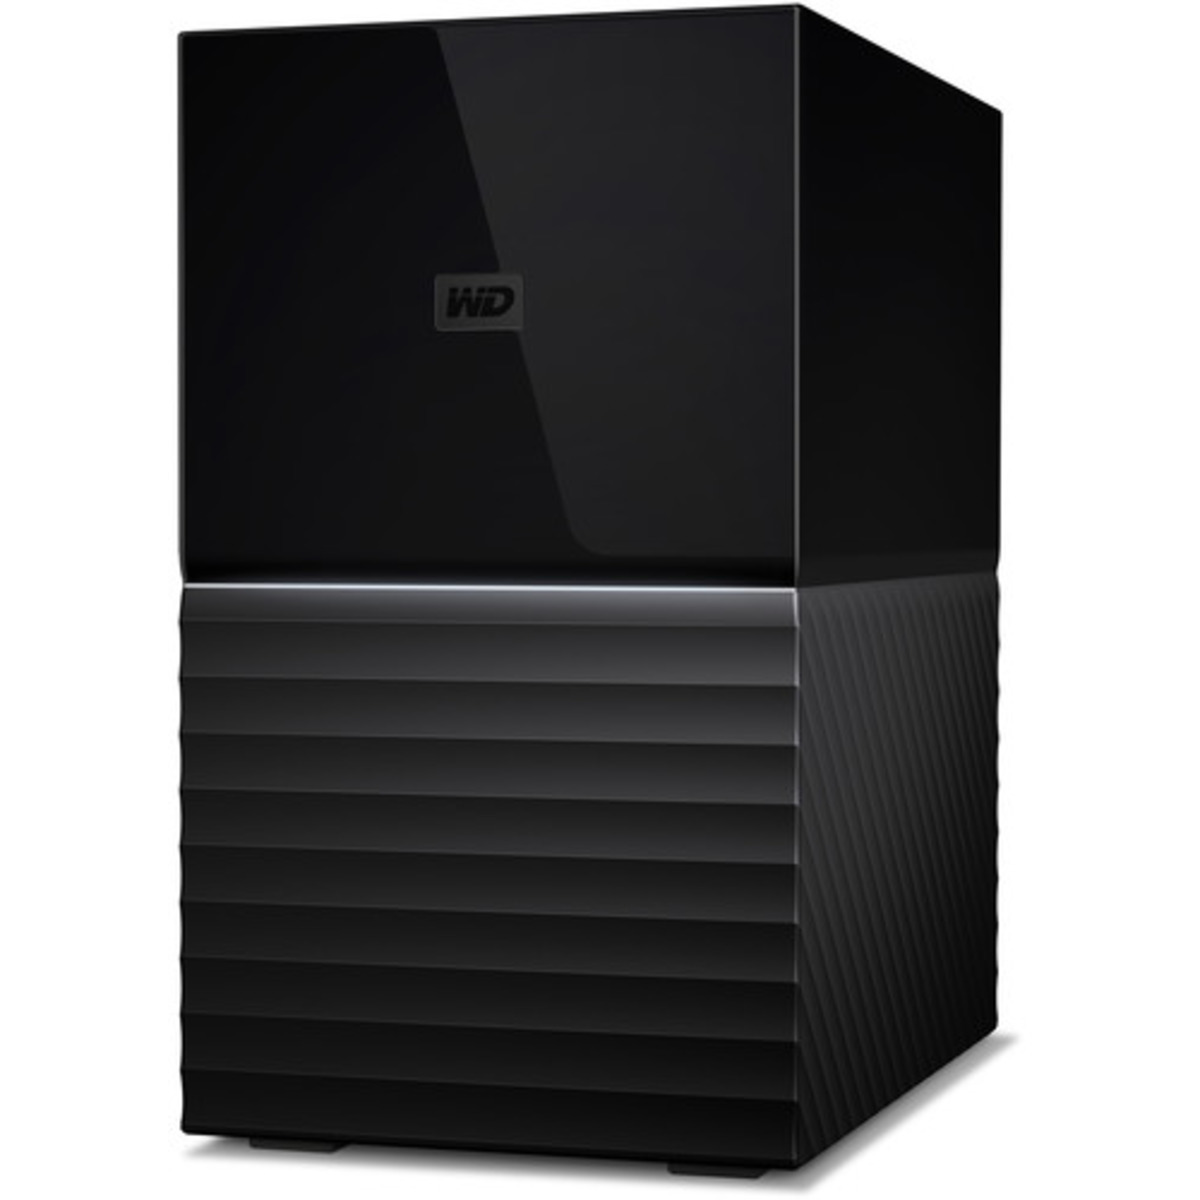 Western Digital My Book DUO Gen 2 4tb 2-Bay Desktop Personal / Basic Home / Small Office DAS - Direct Attached Storage Device 1x4tb Western Digital Blue WD40EZRZ 3.5 5400rpm SATA 6Gb/s HDD CONSUMER Class Drives Installed - Burn-In Tested - ON SALE My Book DUO Gen 2